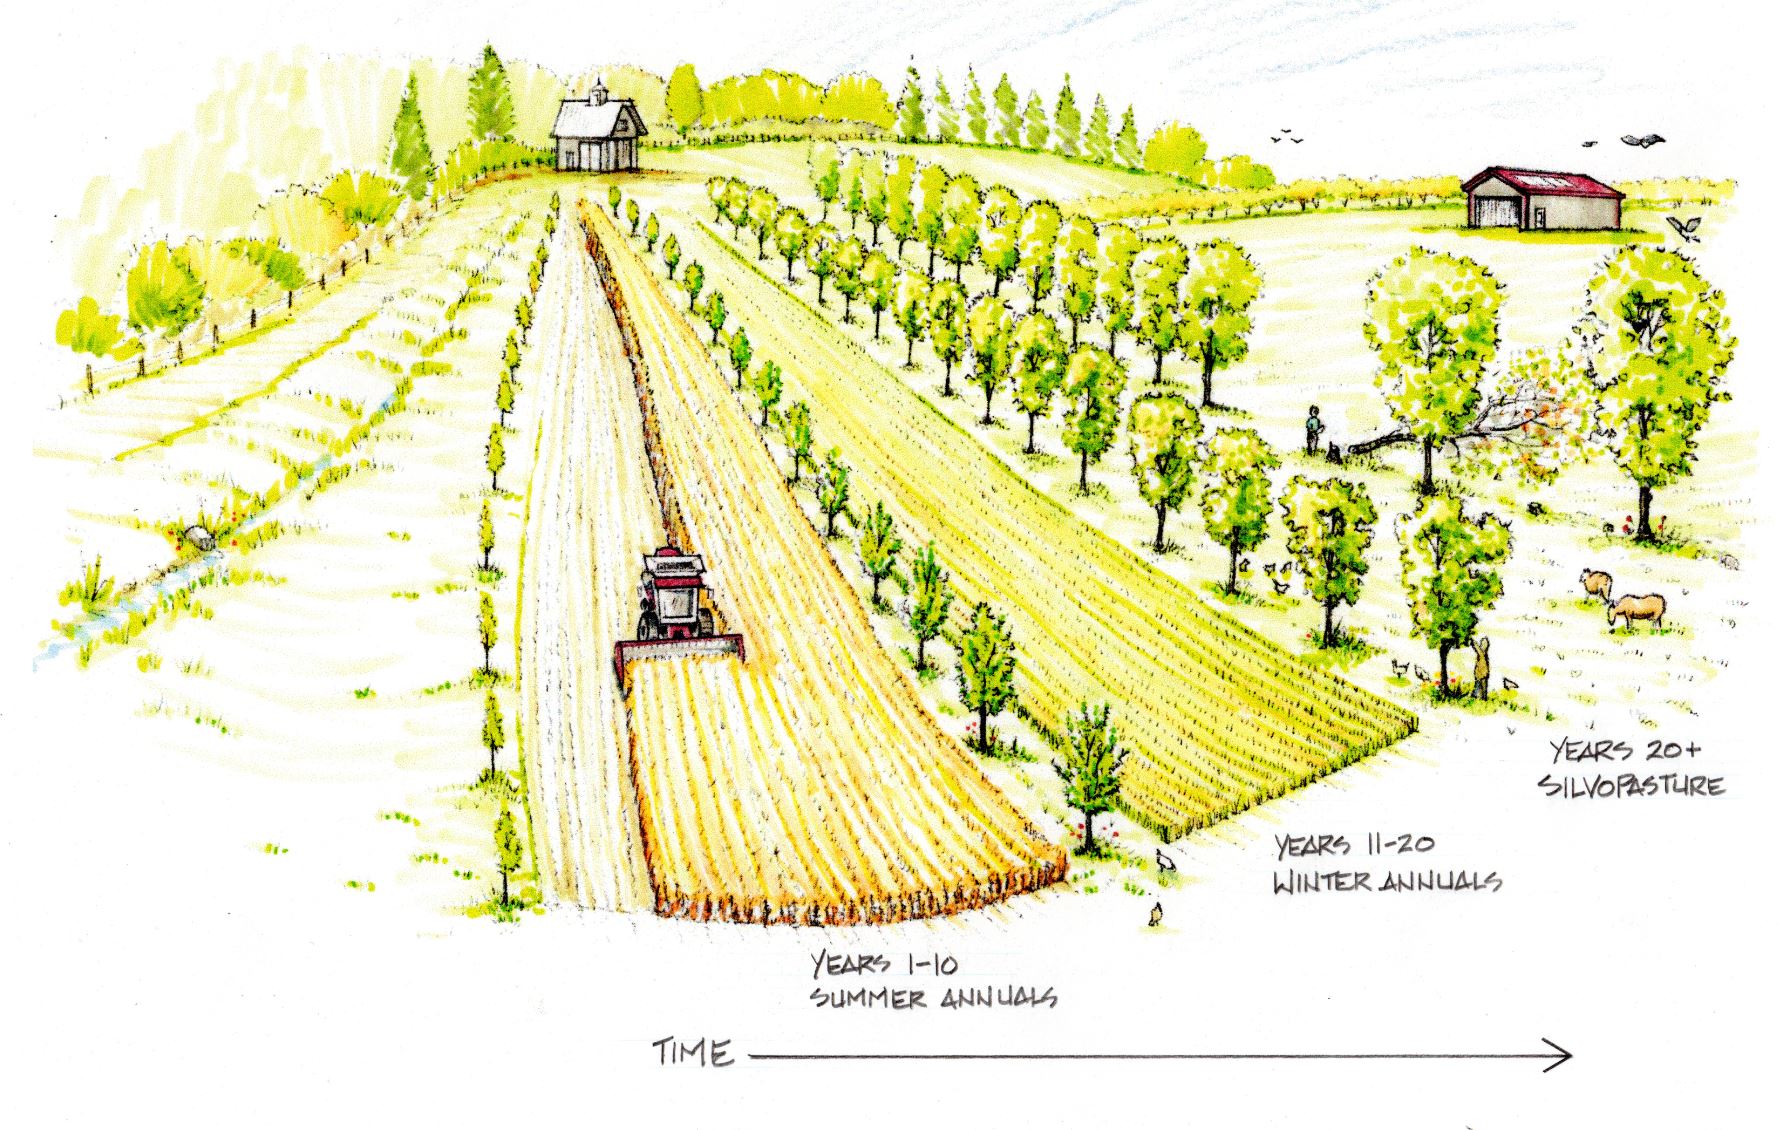 Figure 1: As this image of alley cropping demonstrates that alley cropping systems can be transitioned from summer annuals to winter annuals as trees mature, and finally to silvopasture or forest farming under a fully closed canopy.